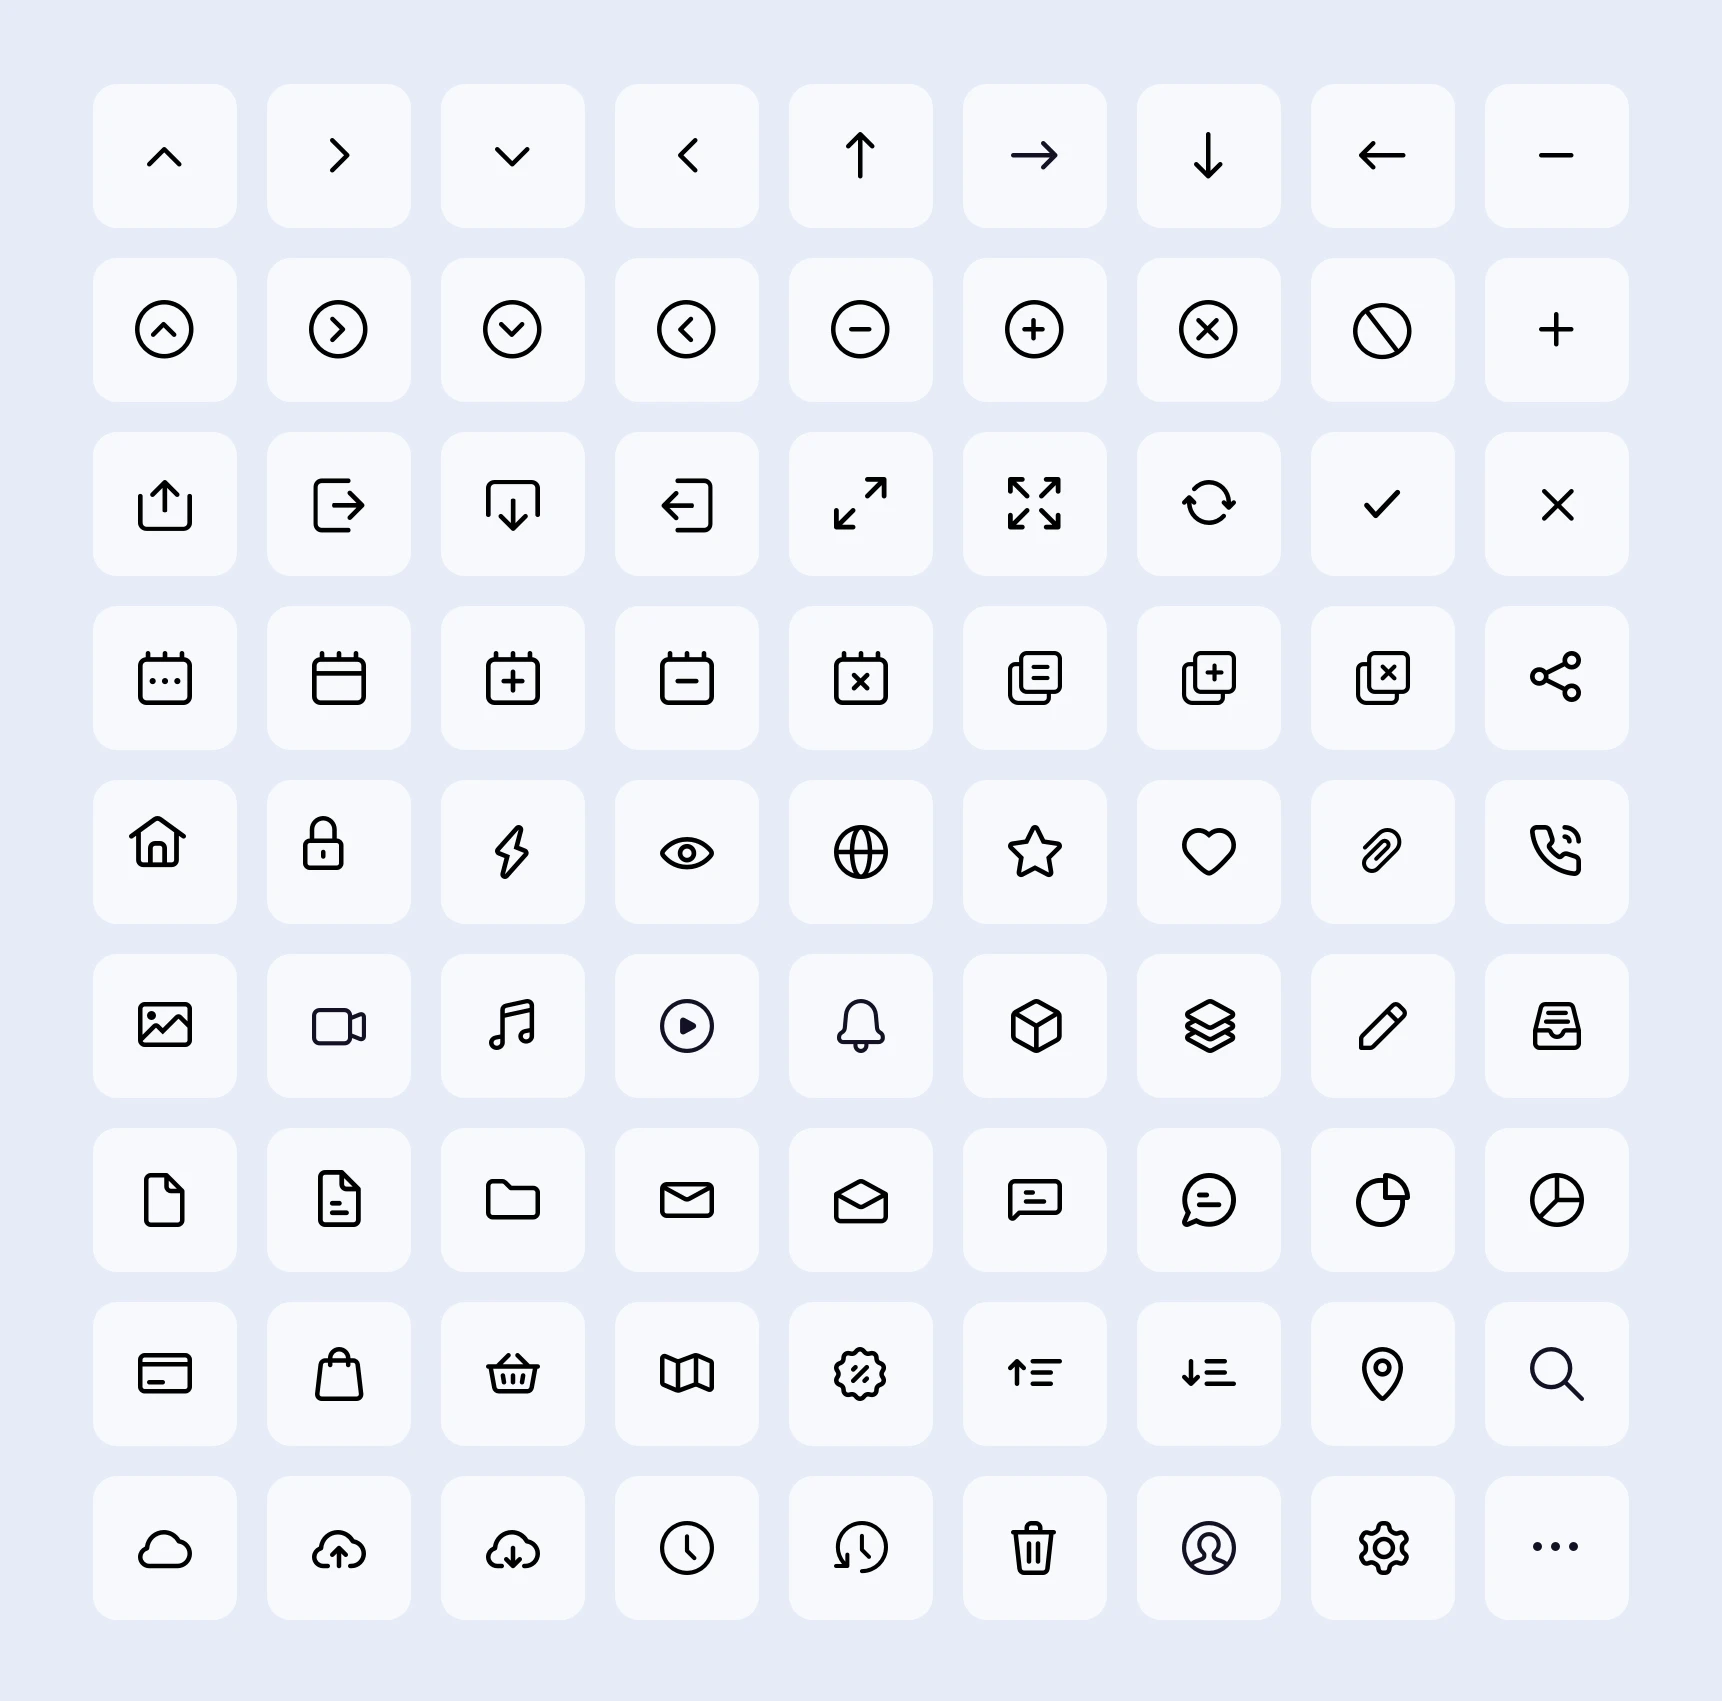 81 Mini Essential Icons for Sketch - Elegant and clean icons design for any kind of project.